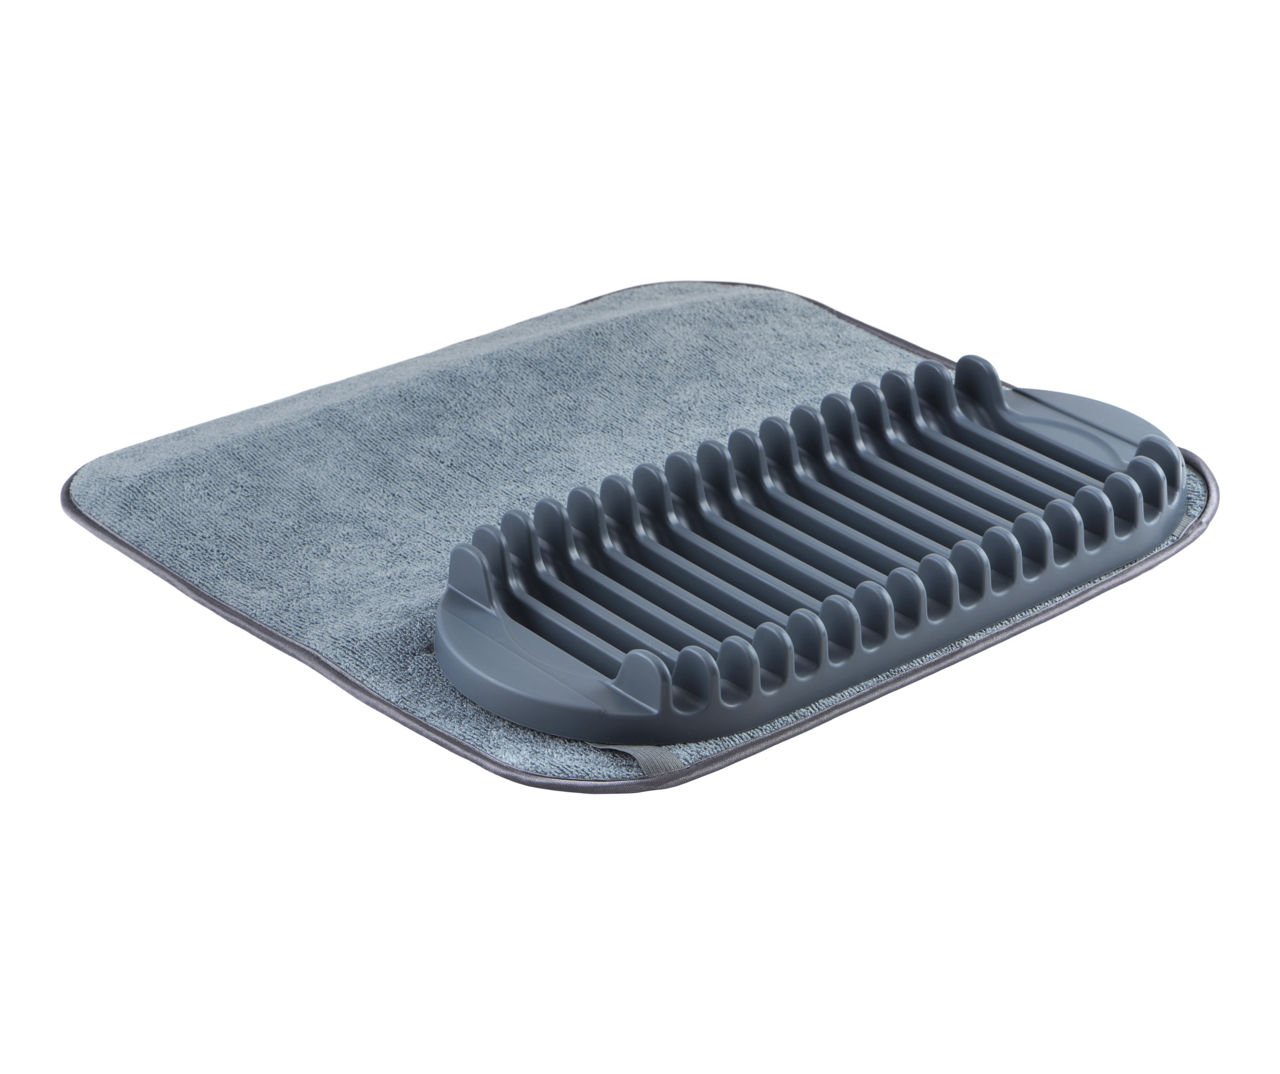 Casabella - Gray Drying Mat with Plastic Rack